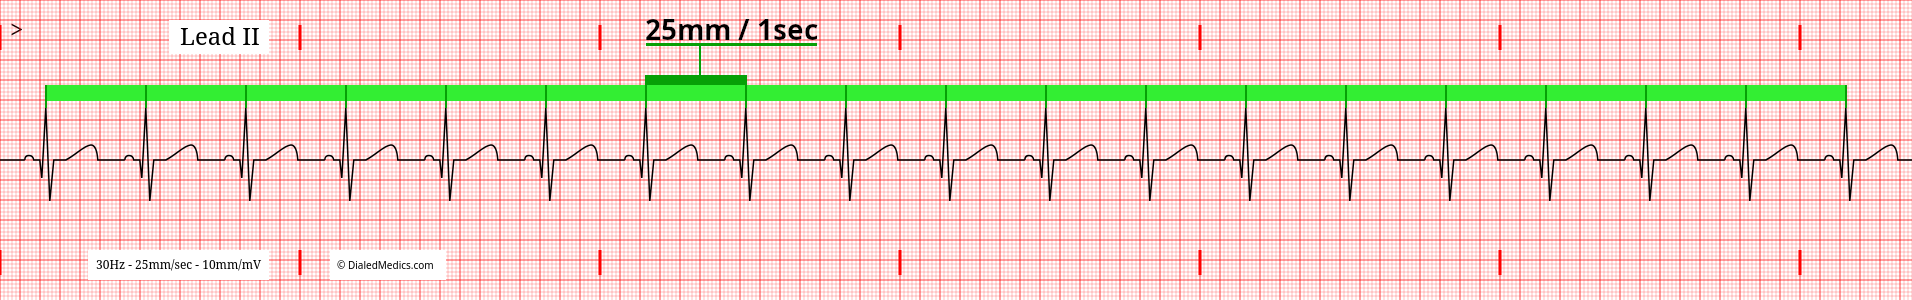 Software generated EKG tracing of a normal sinus rhythm at 60bpm with R-R Interval of 25mm / 1sec marked .